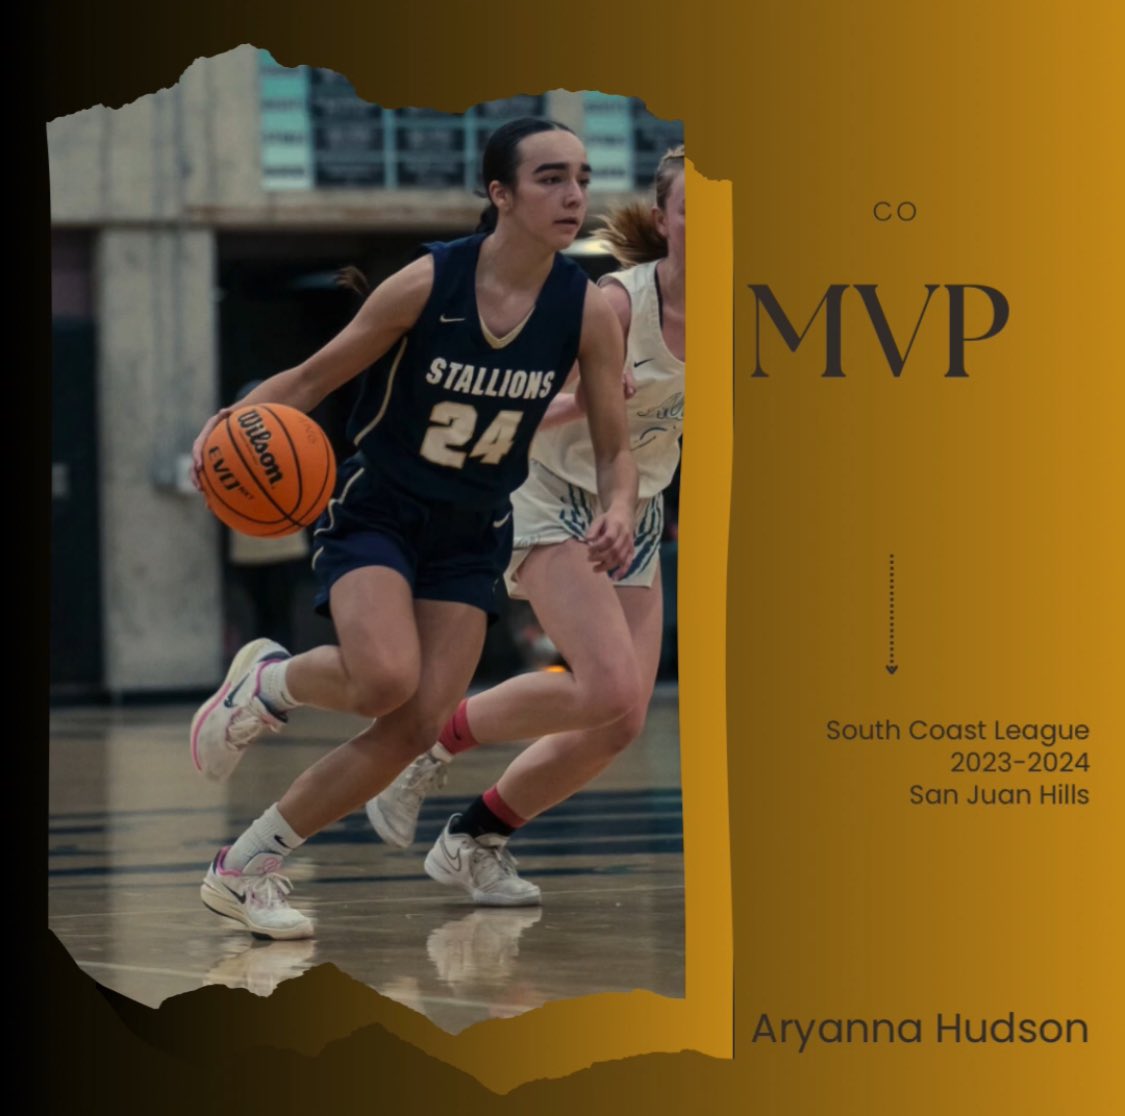 Aryanna Hudson has been selected as co MVP of the South Coast League! Described by her coach as steady, solid, and dependable with a work ethic that is inspiring. She avg 15.5pts/5.2ast on her way to: -League title -D1 playoff win -1262 career pts -513 career ast-school record